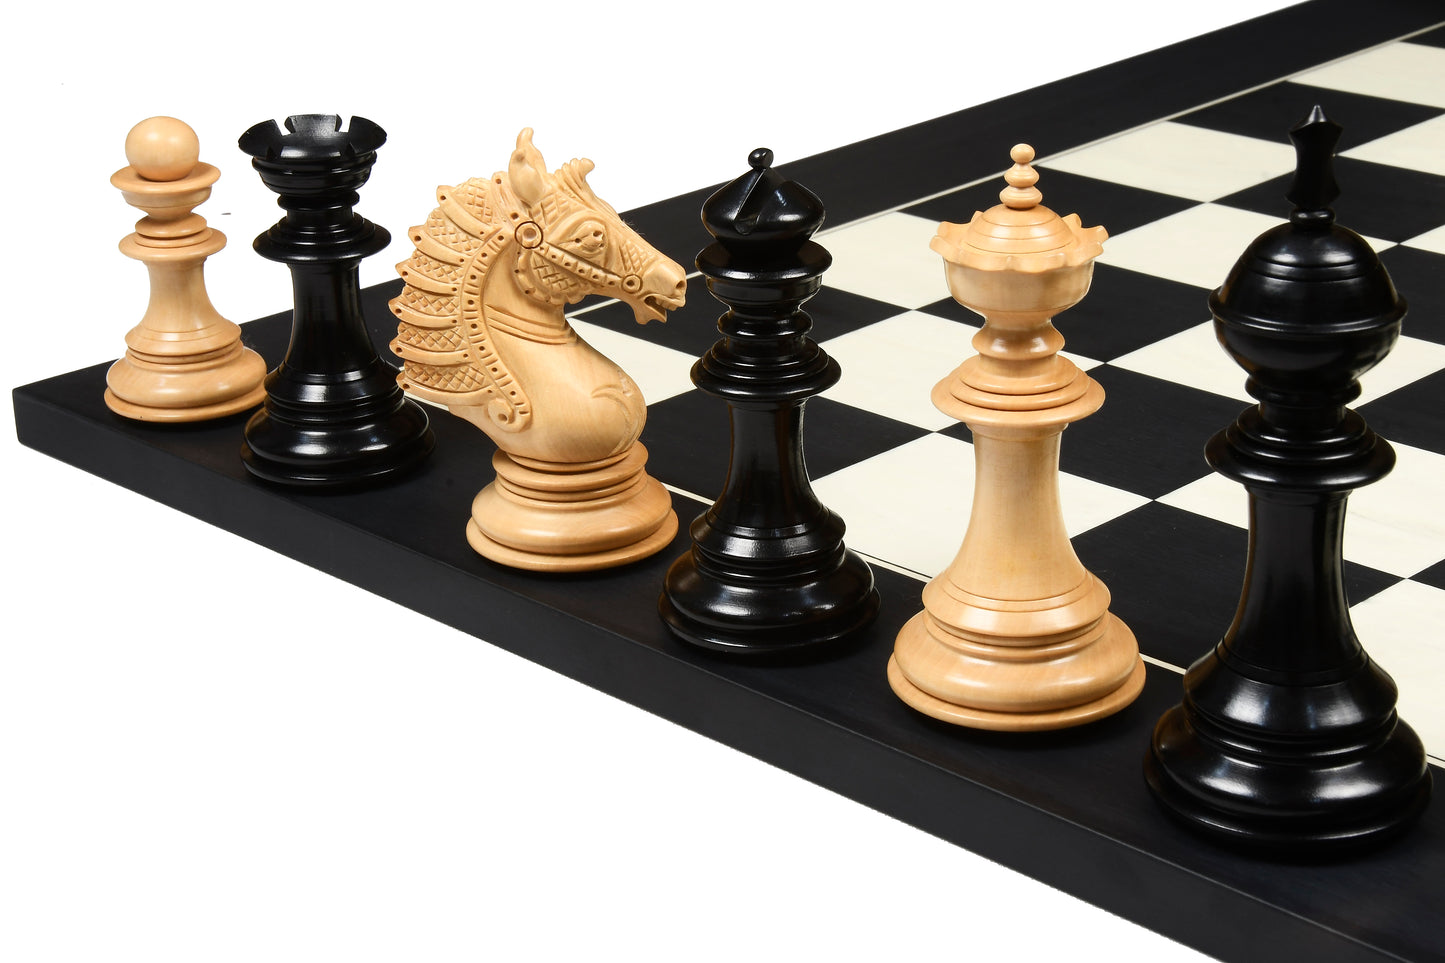 The Sikh Empire Series Triple Weighted Wooden Handmade Chess Pieces in Genuine Ebony Wood and Indian Boxwood - 4.5" King with Extra Queens